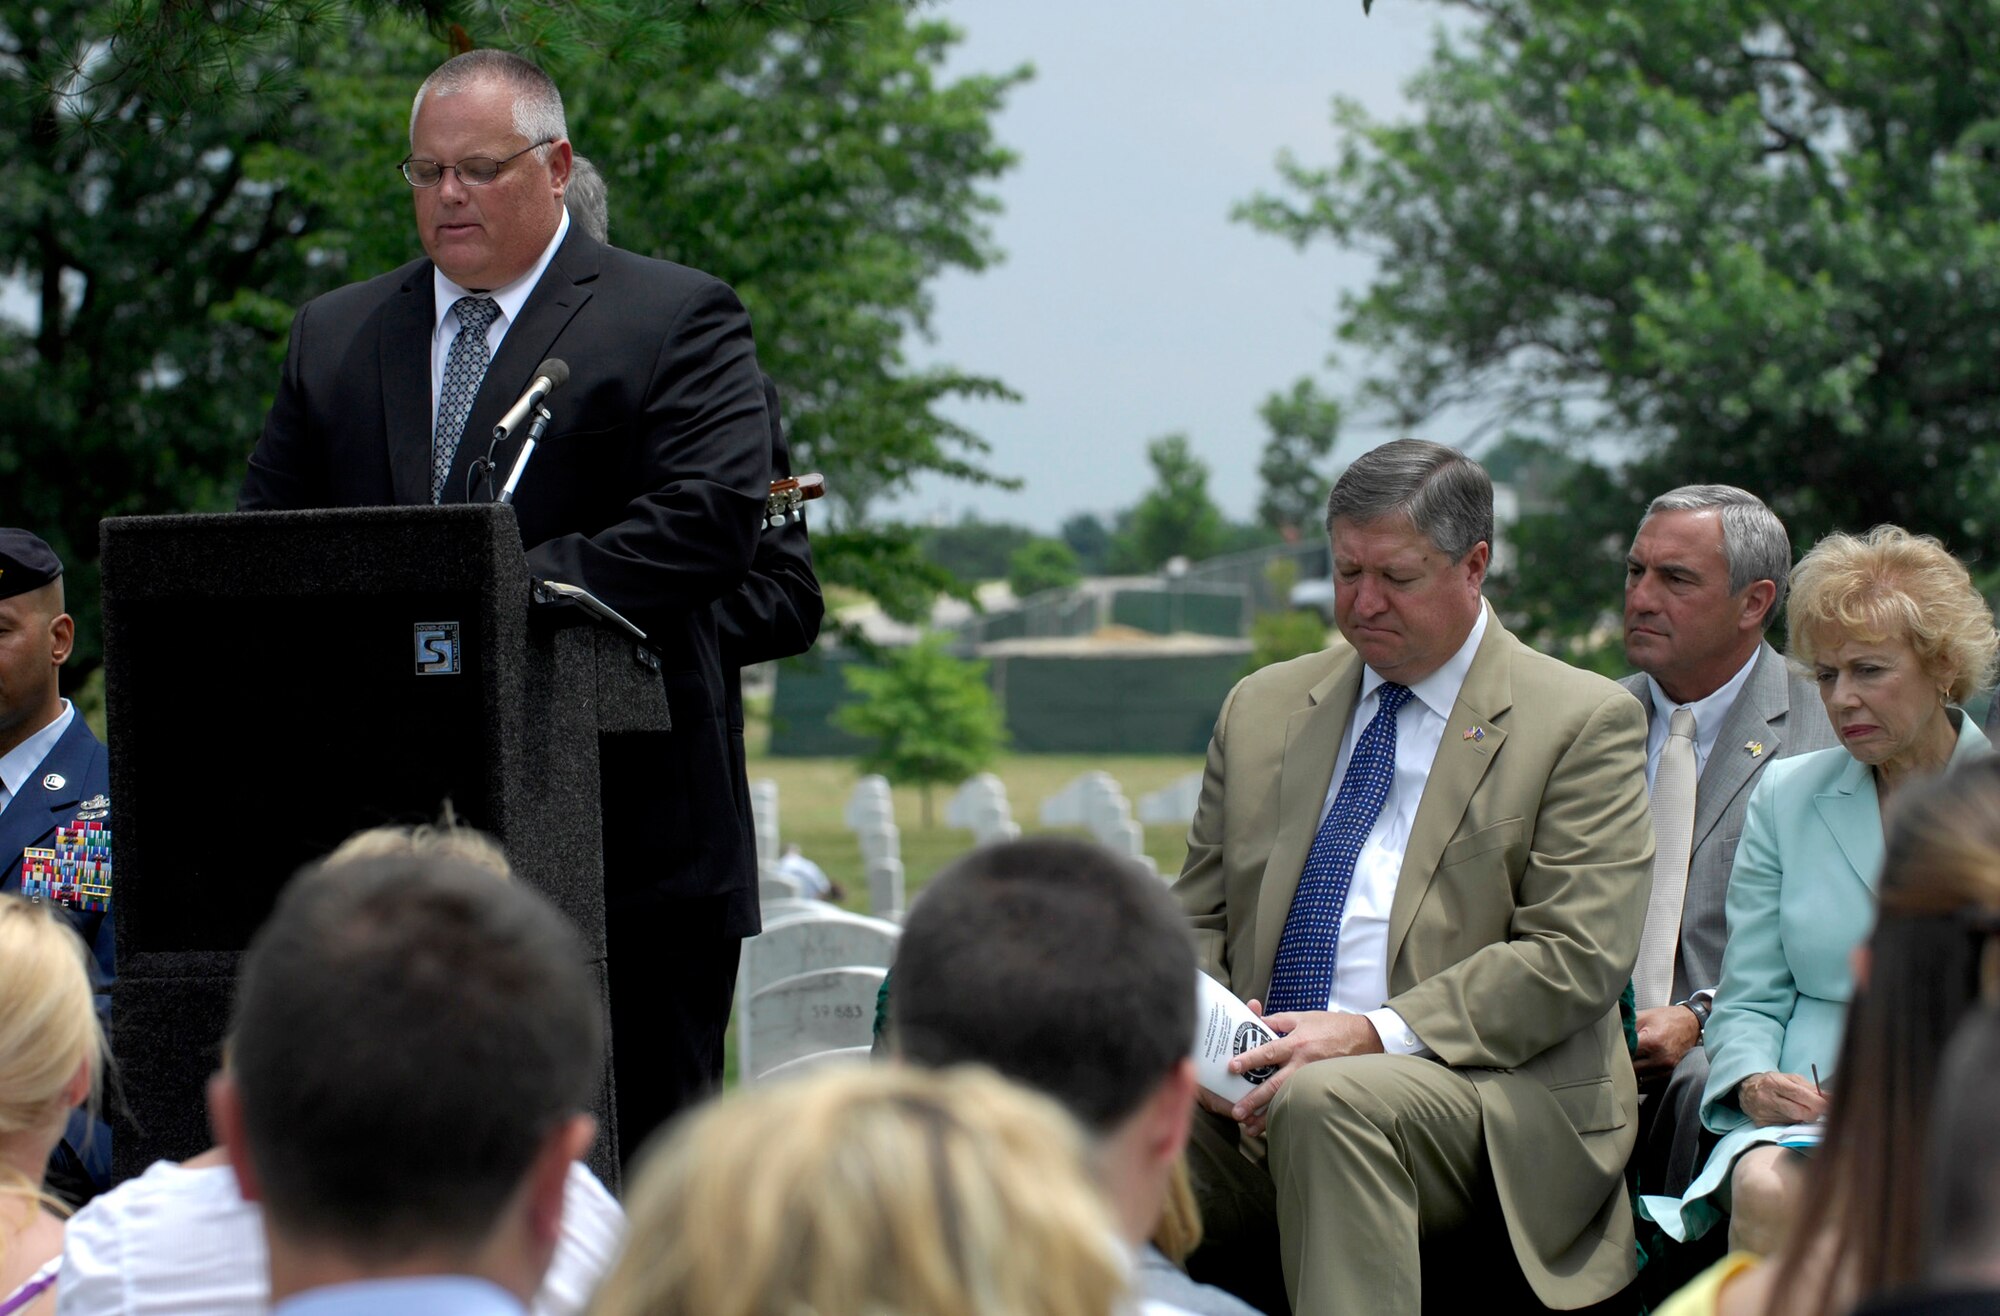 Retired Master Sgt. Eric Ziegler addresses guests during a remembrance ceremony, June 25, 2011, at Arlington National Cemetery, Va., to mark the 15th anniversary since the Khobar Towers bombing. Nineteen Airmen were killed in the terrorist bombing, June 25, 1996, at Dhahran Air Base, Saudi Arabia. (U.S. Air Force photo/Staff Sgt. Tiffany Trojca)